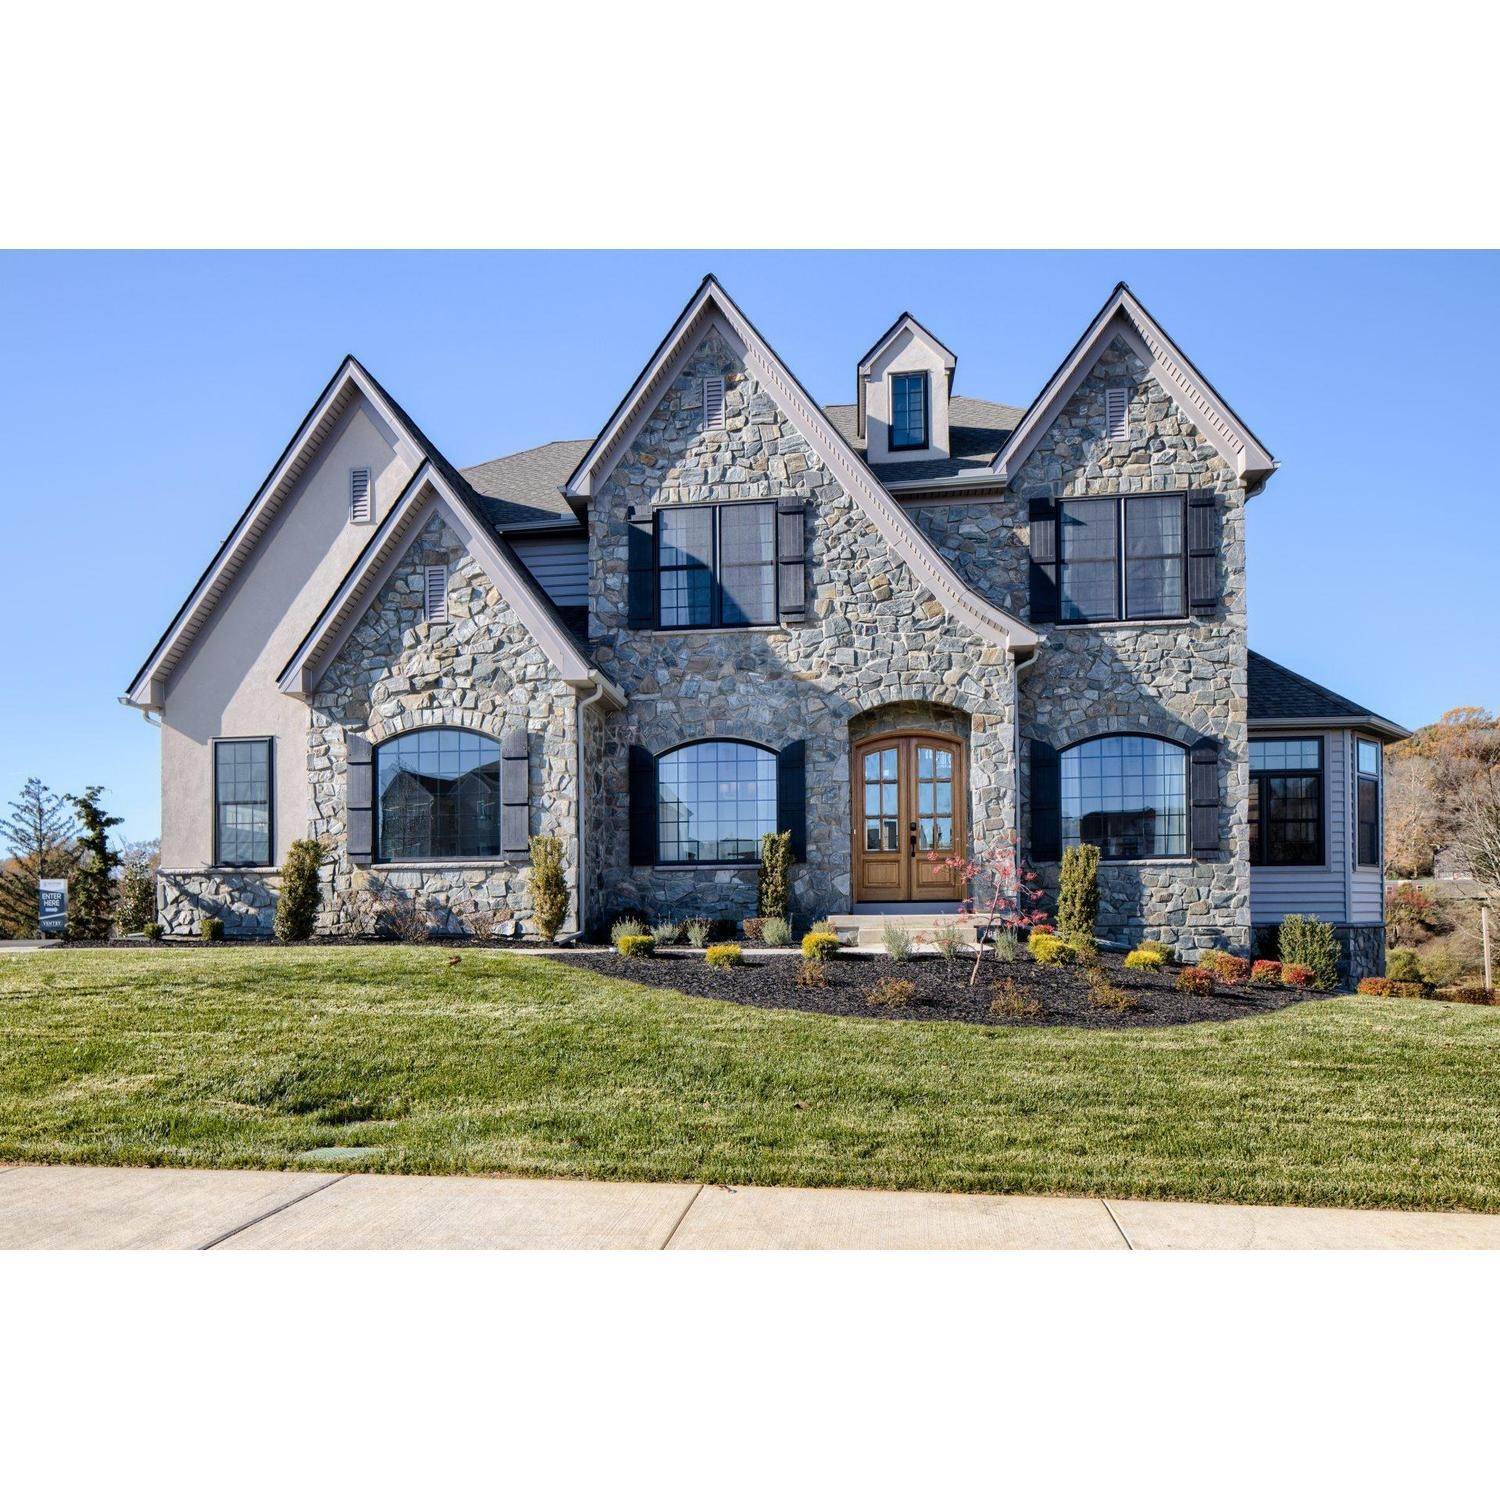 23. 101 Parkview Way, Newtown Square, PA 19073에 Ventry at Edgmont Preserve 건물